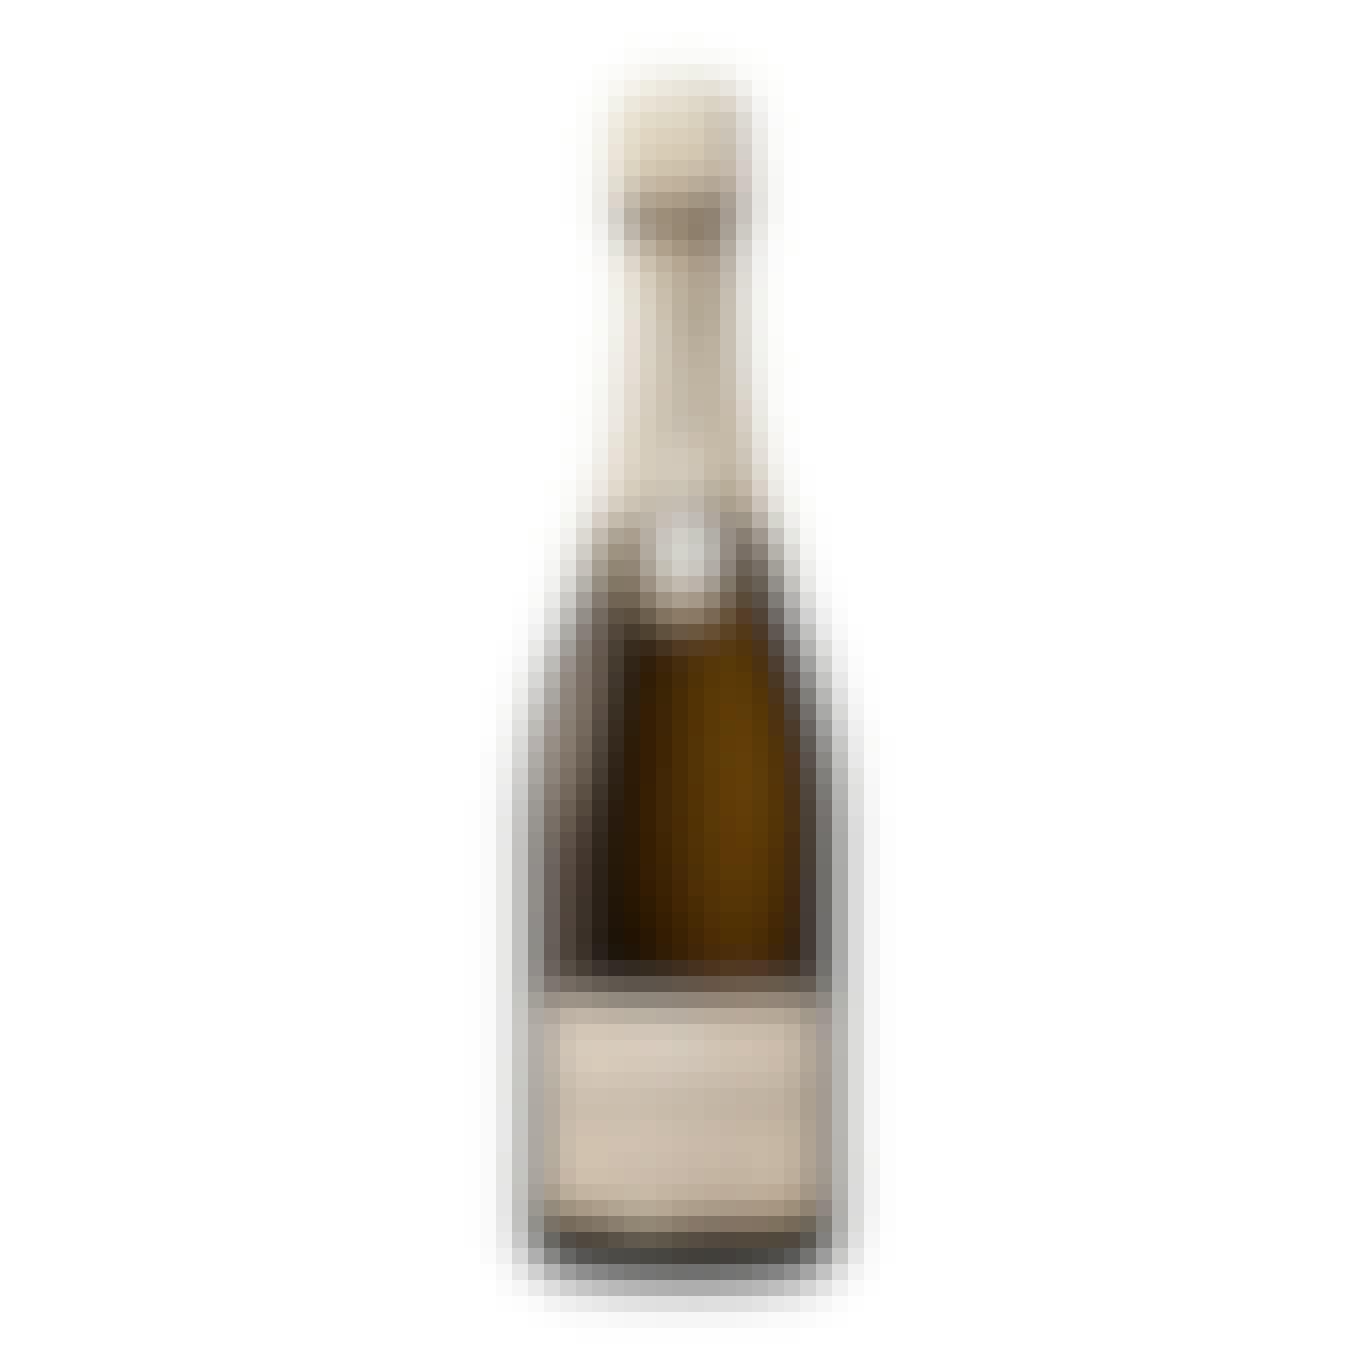 Louis Roederer Collection 244 Champagne 750ml